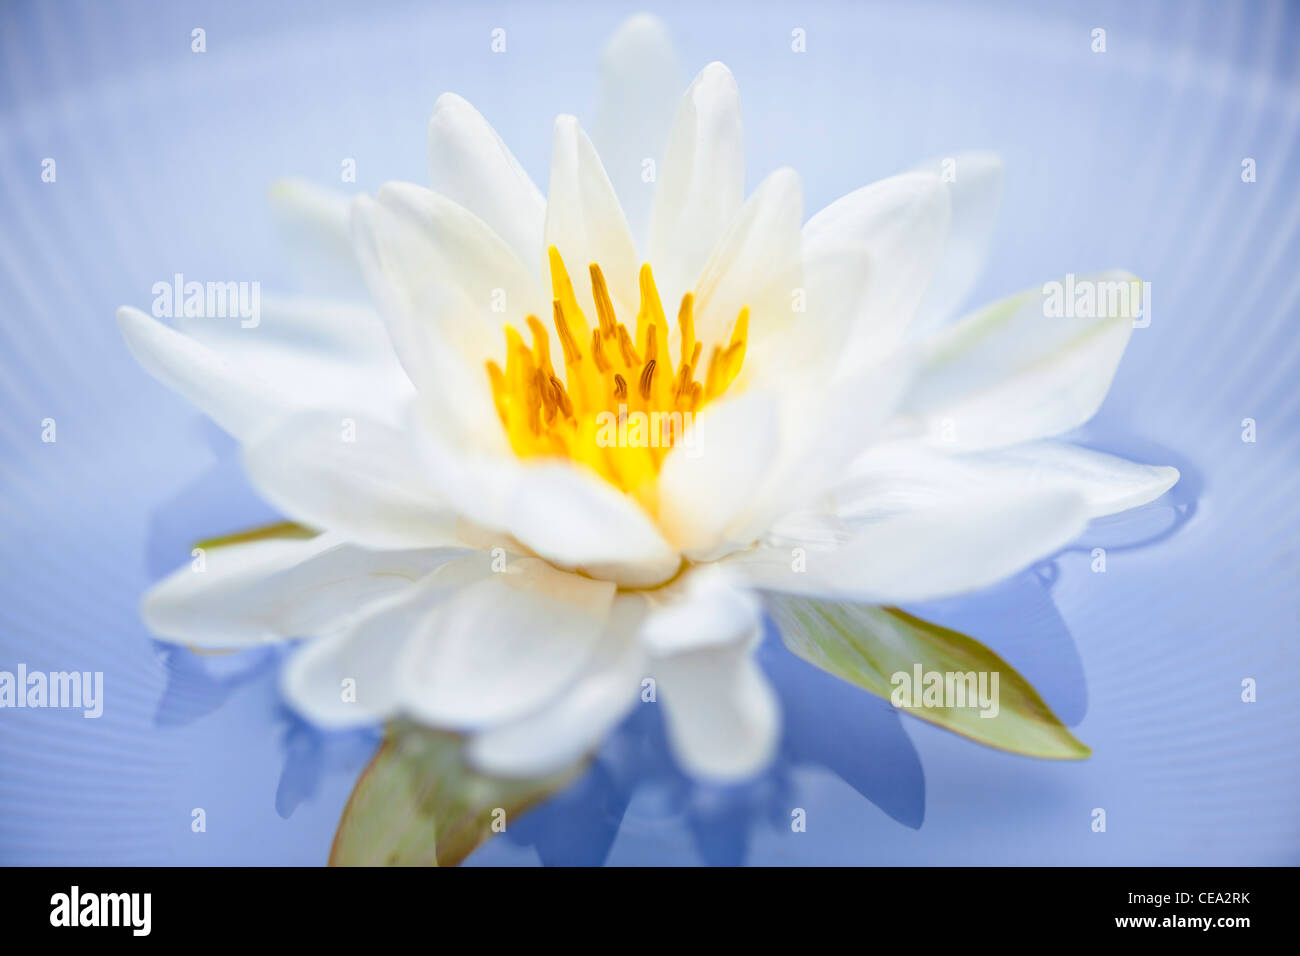 White lotus flower or water lily floating Stock Photo